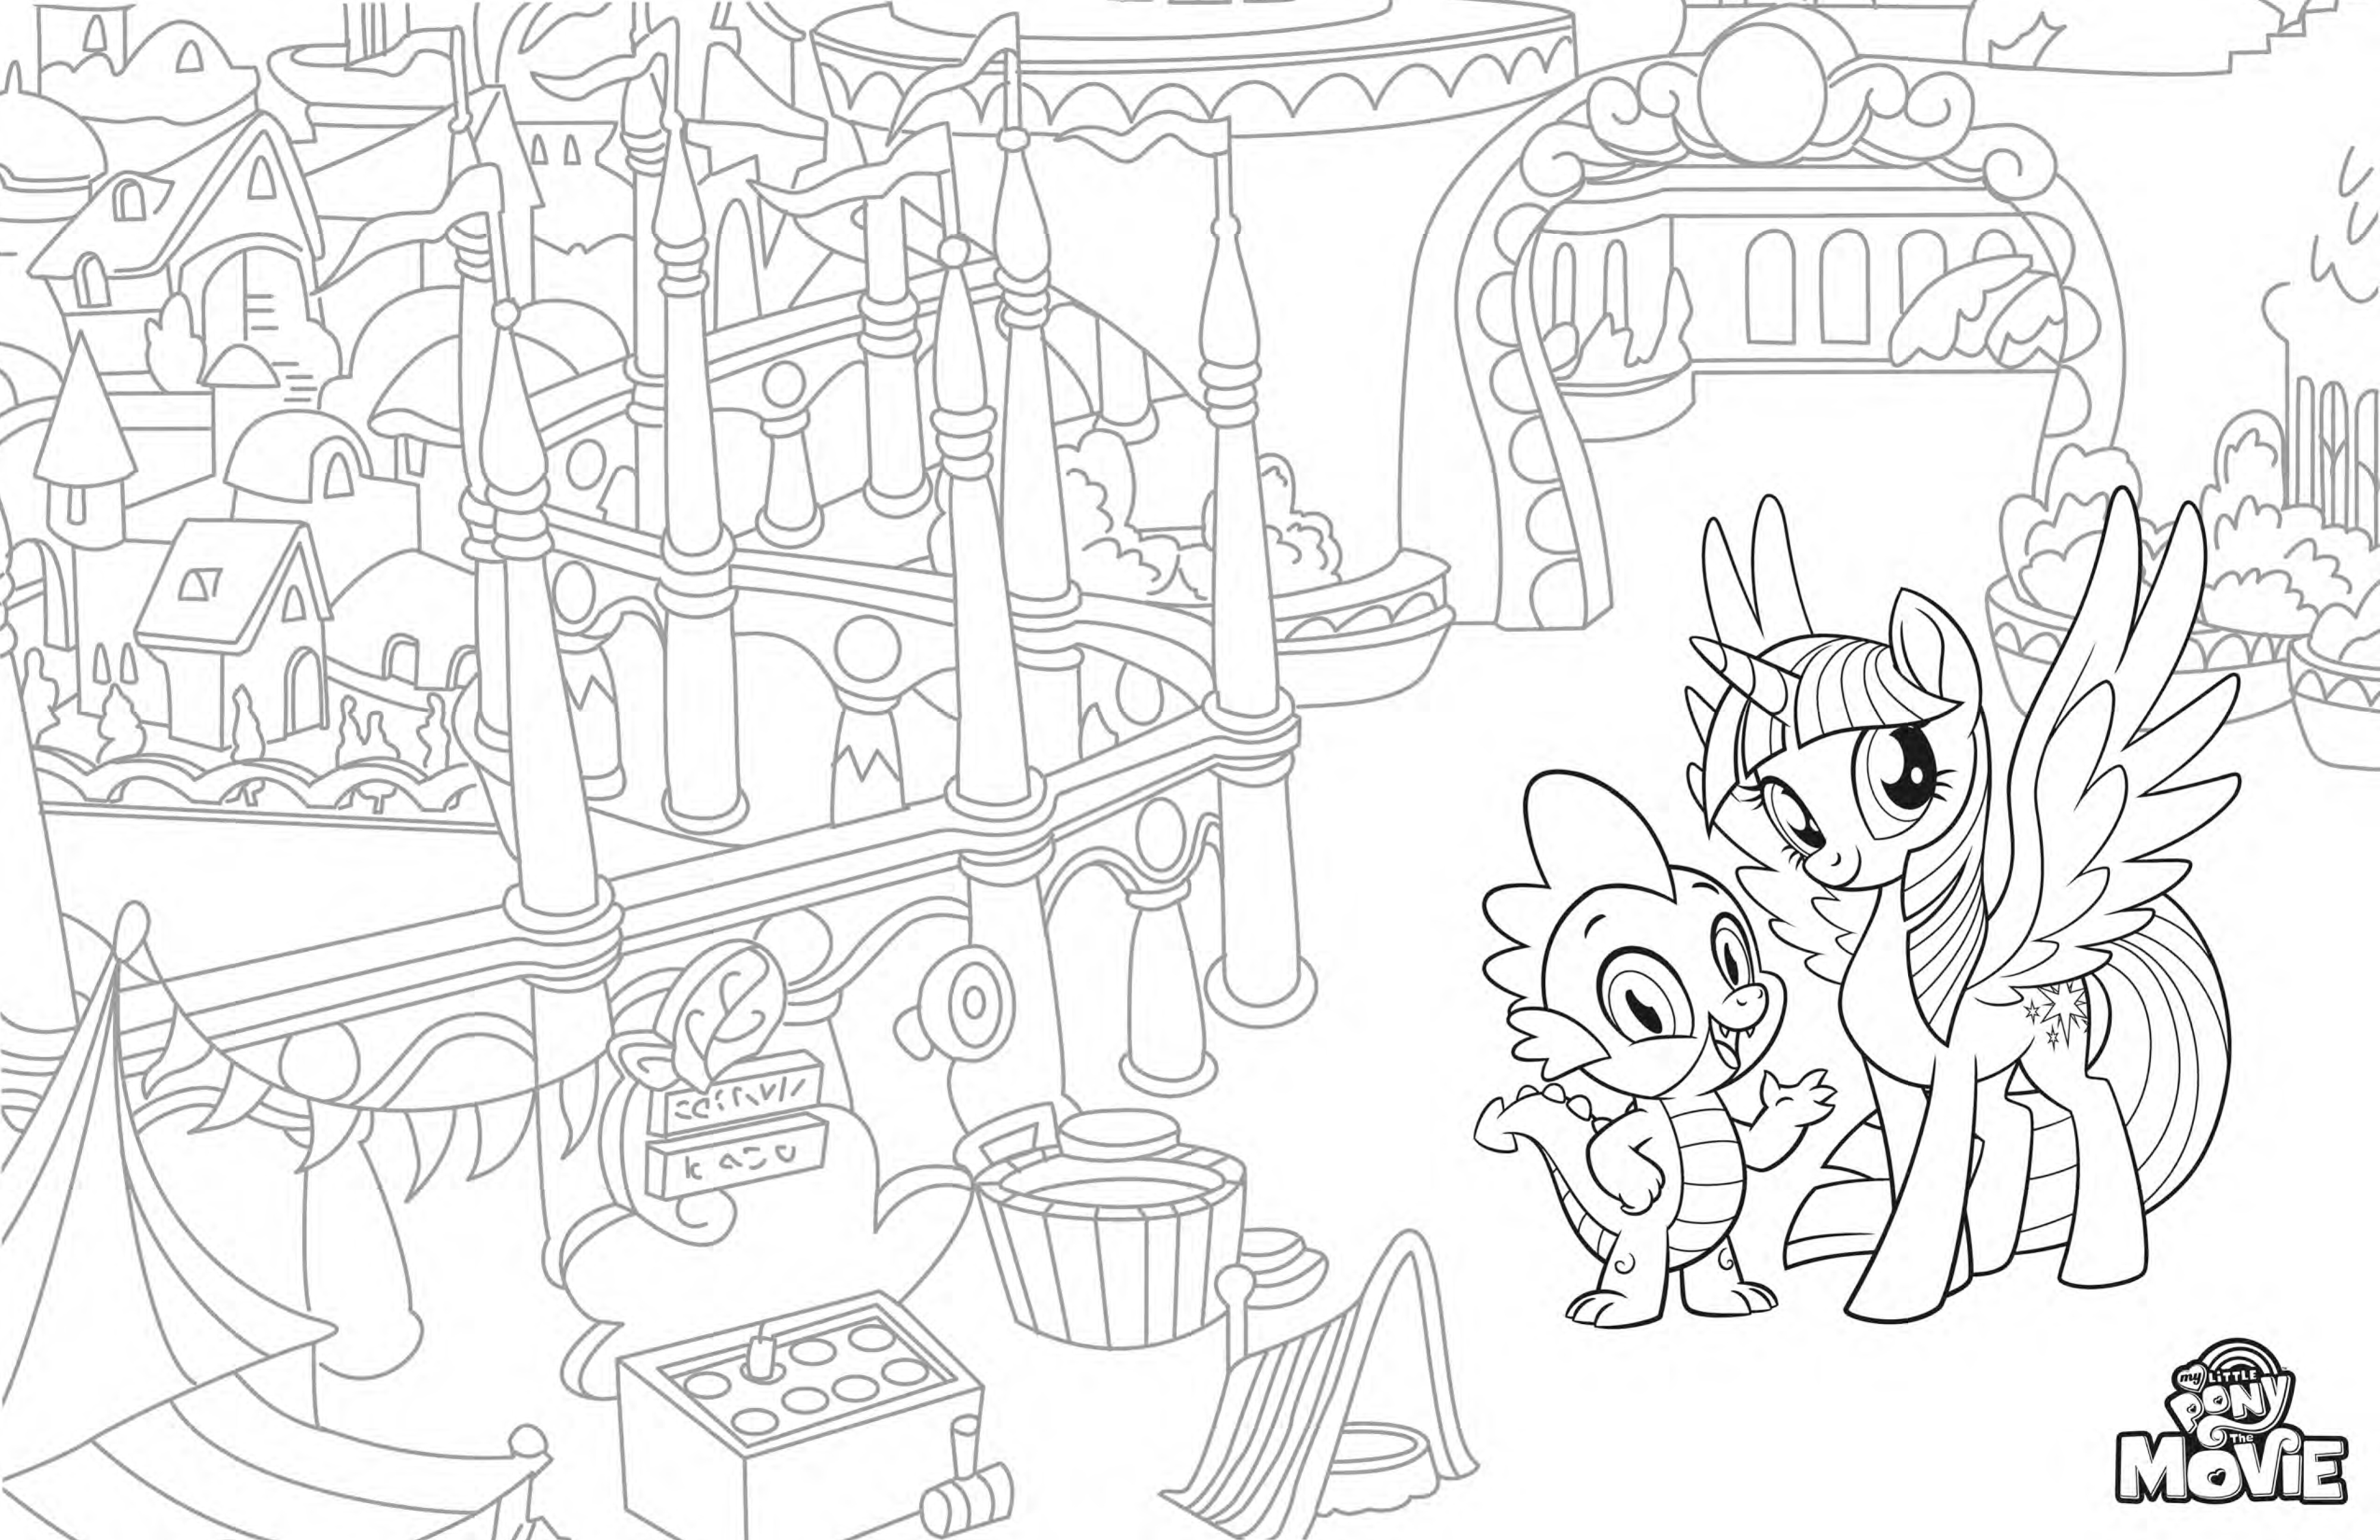 My Little Pony The Movie Coloring Pages Youloveit Com My little pony, friendship is magic pictures are absolute favorites of little girls. youloveit com